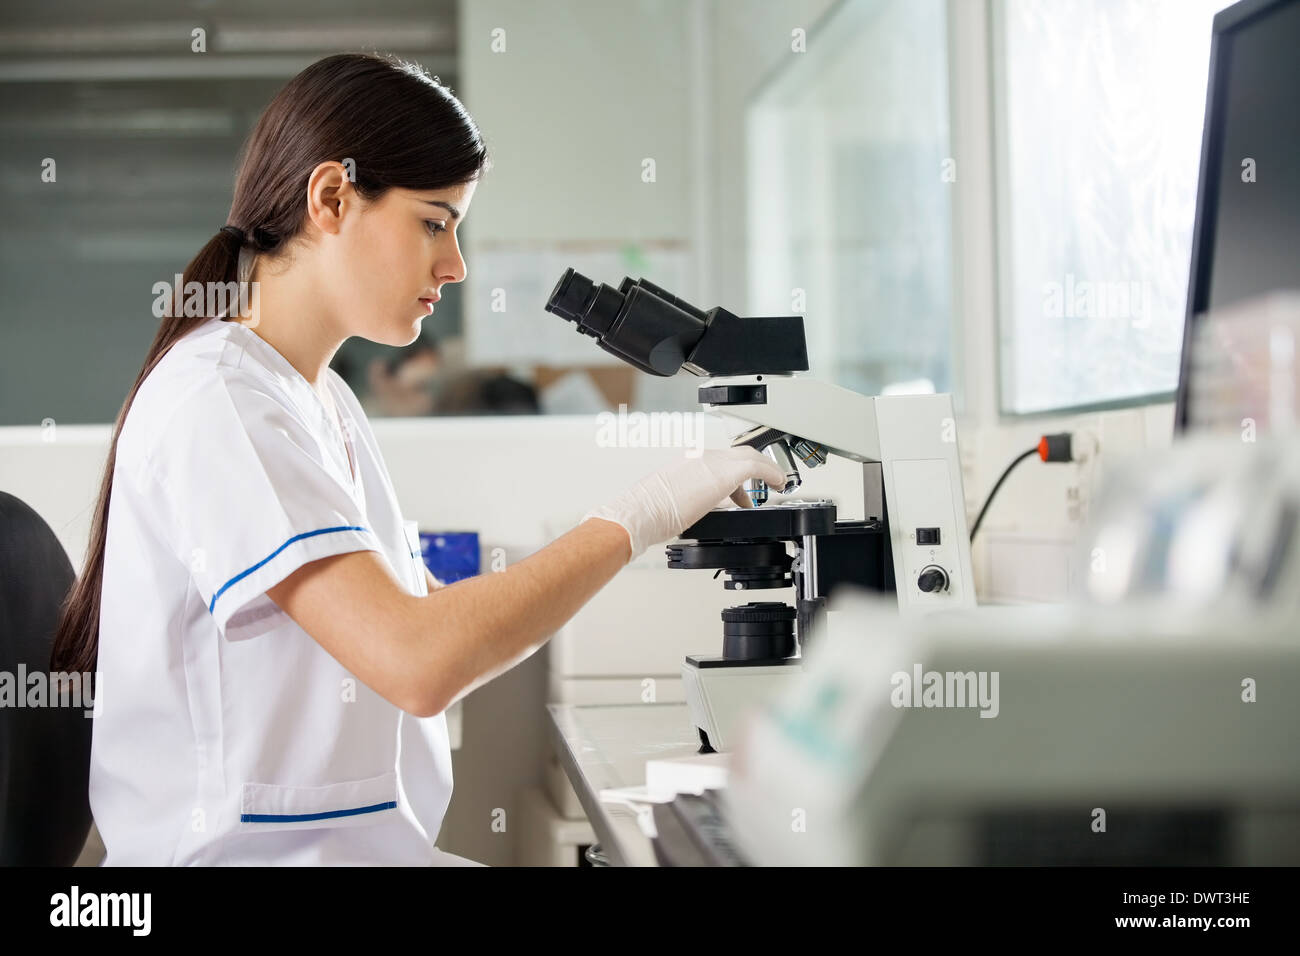 Female scientist using microscope in lab Banque D'Images